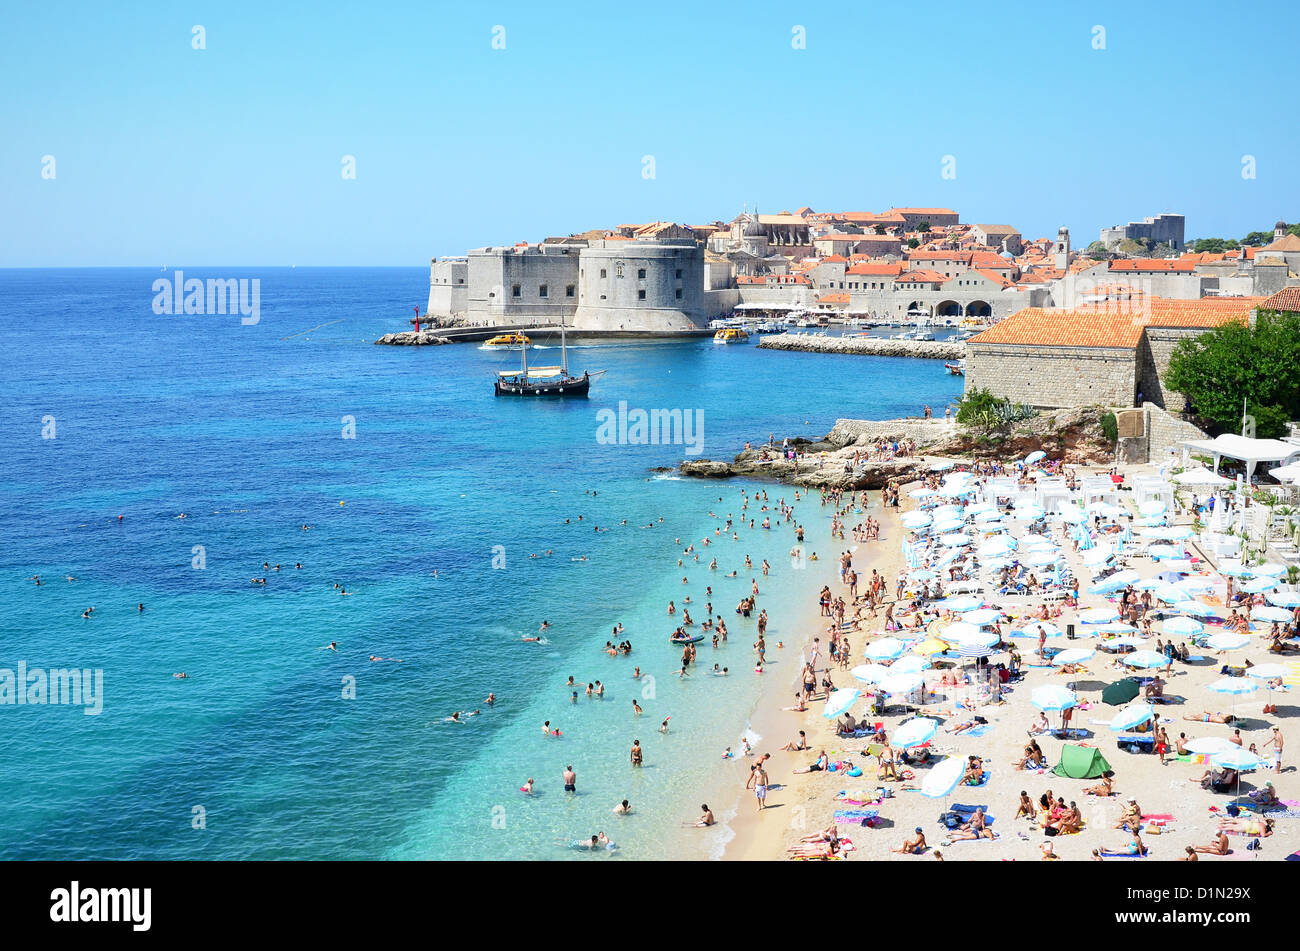 A beach outside the old city walls of Dubrovnik Croatia Stock Photo